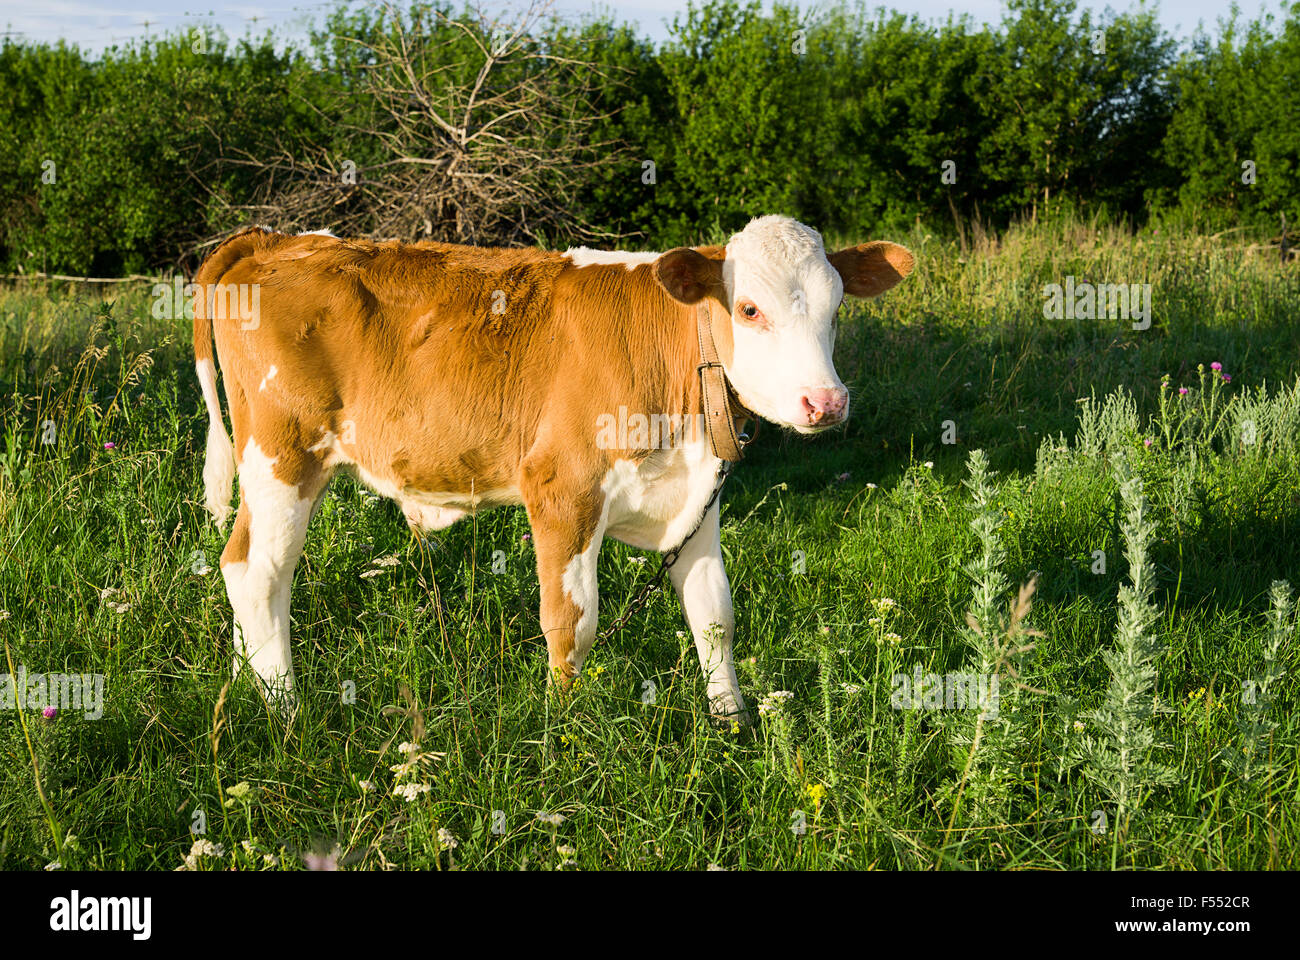 Spotted Calf grazing on green grass Stock Photo